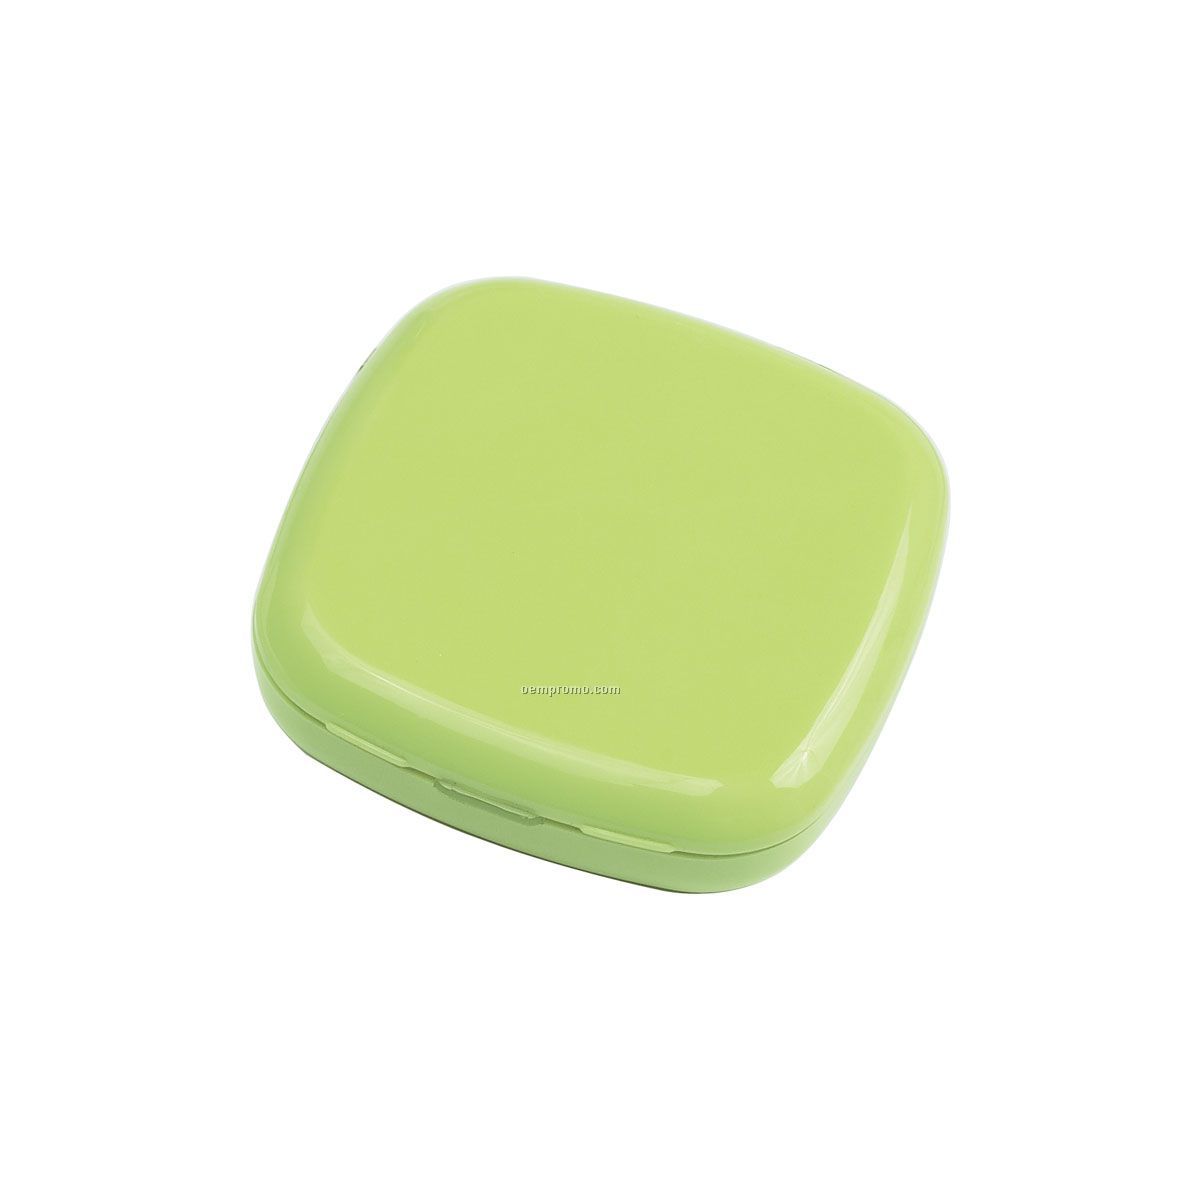 Square Light Up Mirror Compact - Lime Green